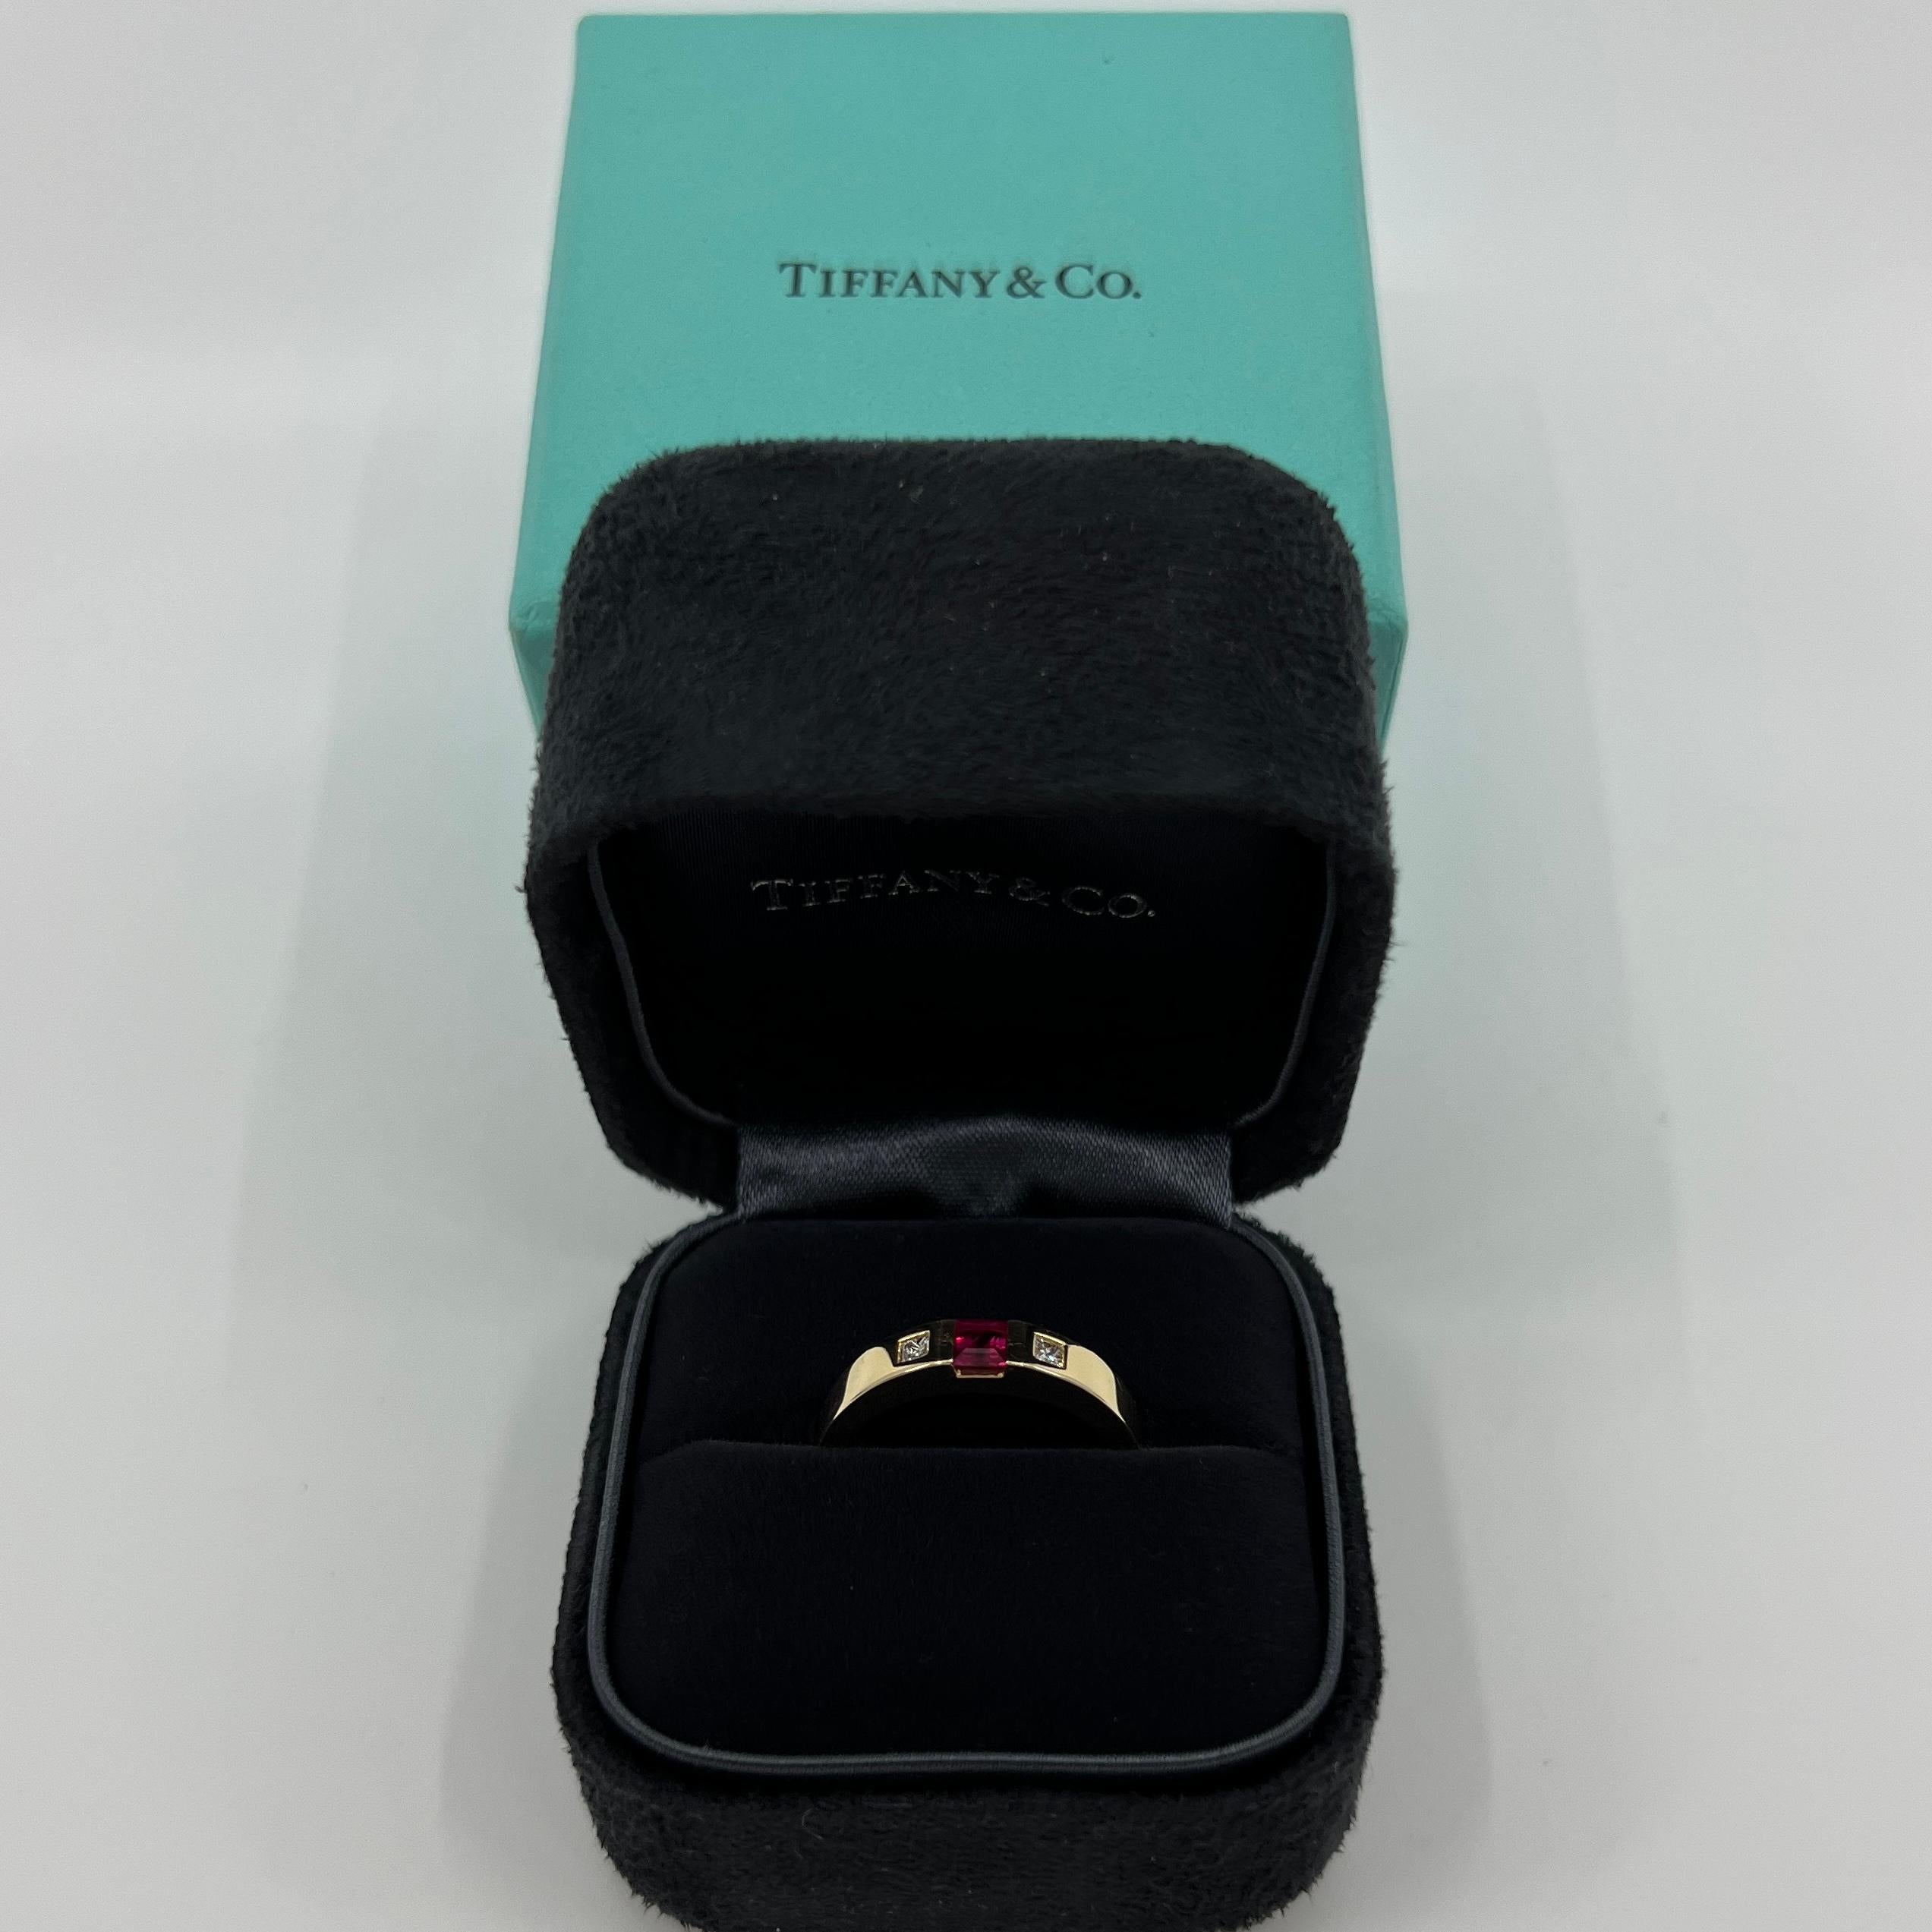 Tiffany & Co Fine Pink Red Ruby & Diamond 18k Yellow Gold Three Stone Band Ring.

Stunning yellow gold ring set with a fine deep pink red ruby and 2 princess cut diamonds.

Fine jewellery houses like Tiffany only use the finest diamonds and